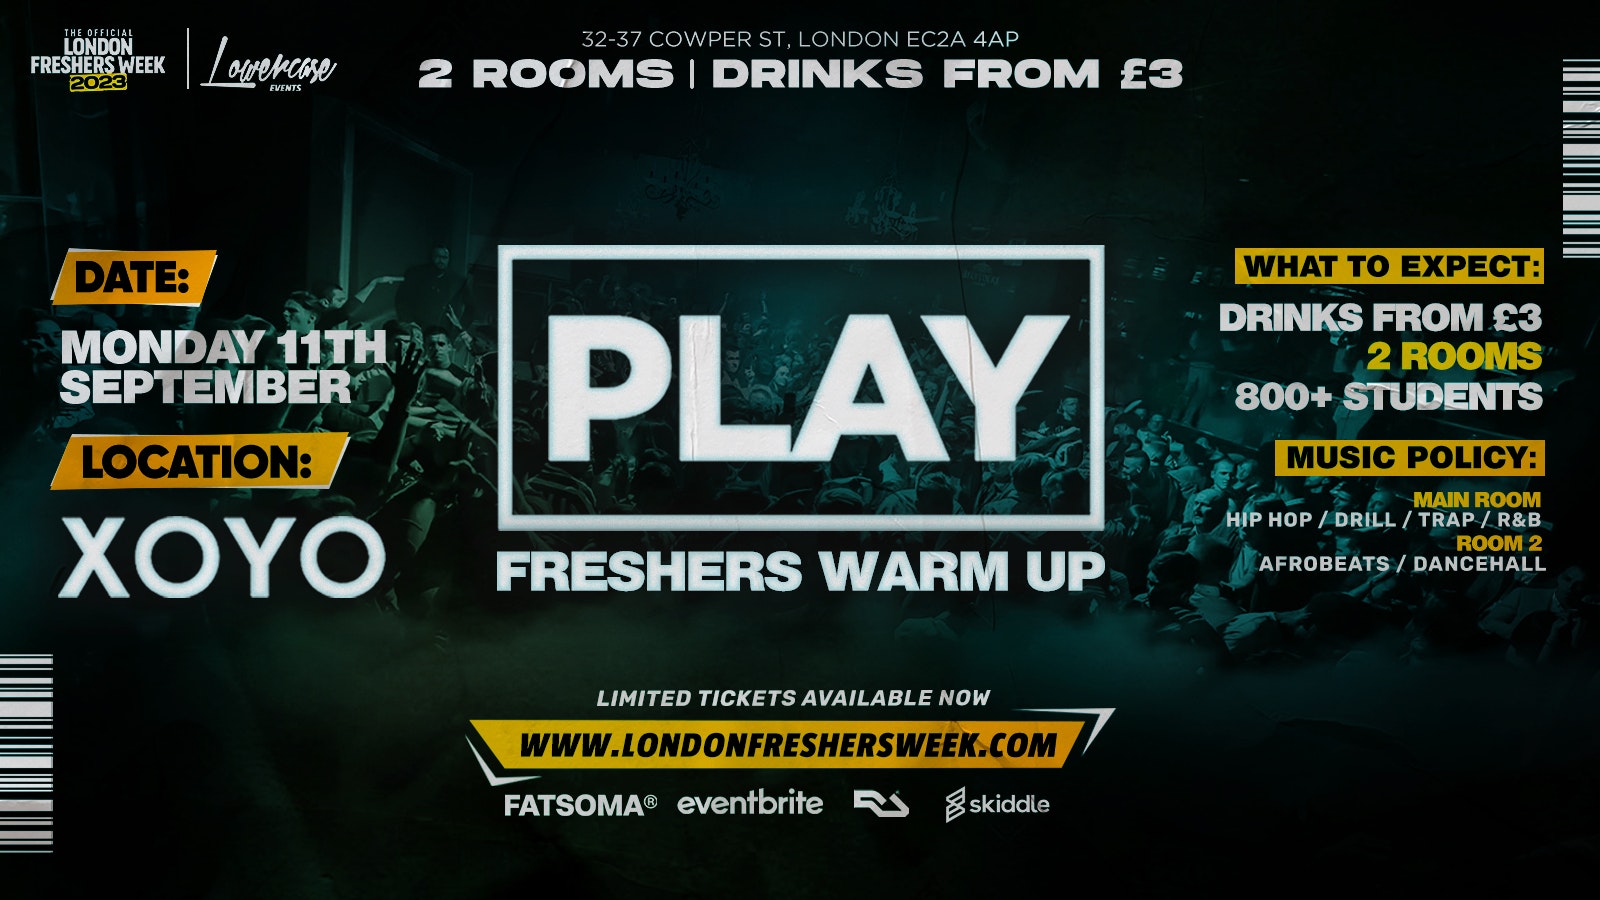 ⚠️ FRESHERS WARM UP ⚠️ Play London Every Monday At XOYO – The Biggest Weekly Monday Student Night